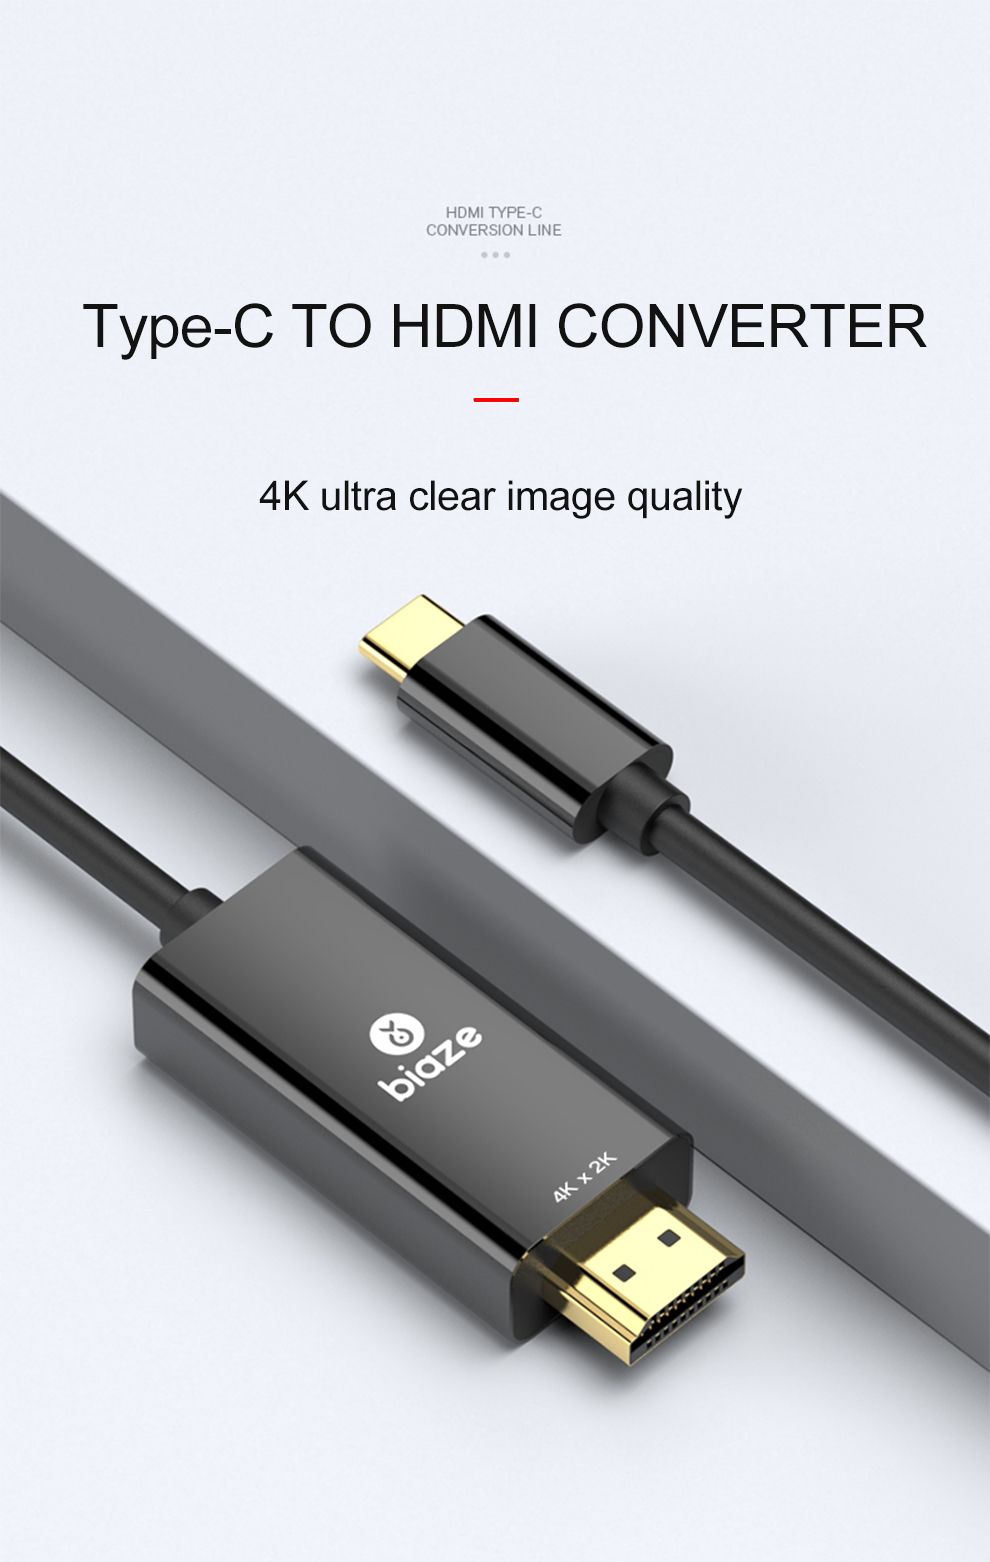 Biaze-Type-C-to-HD-Cable-4K-60Hz-Video-3M-HD-Converter-Video-Adapter-hdmi-Adapter-for-MacBook-1563743